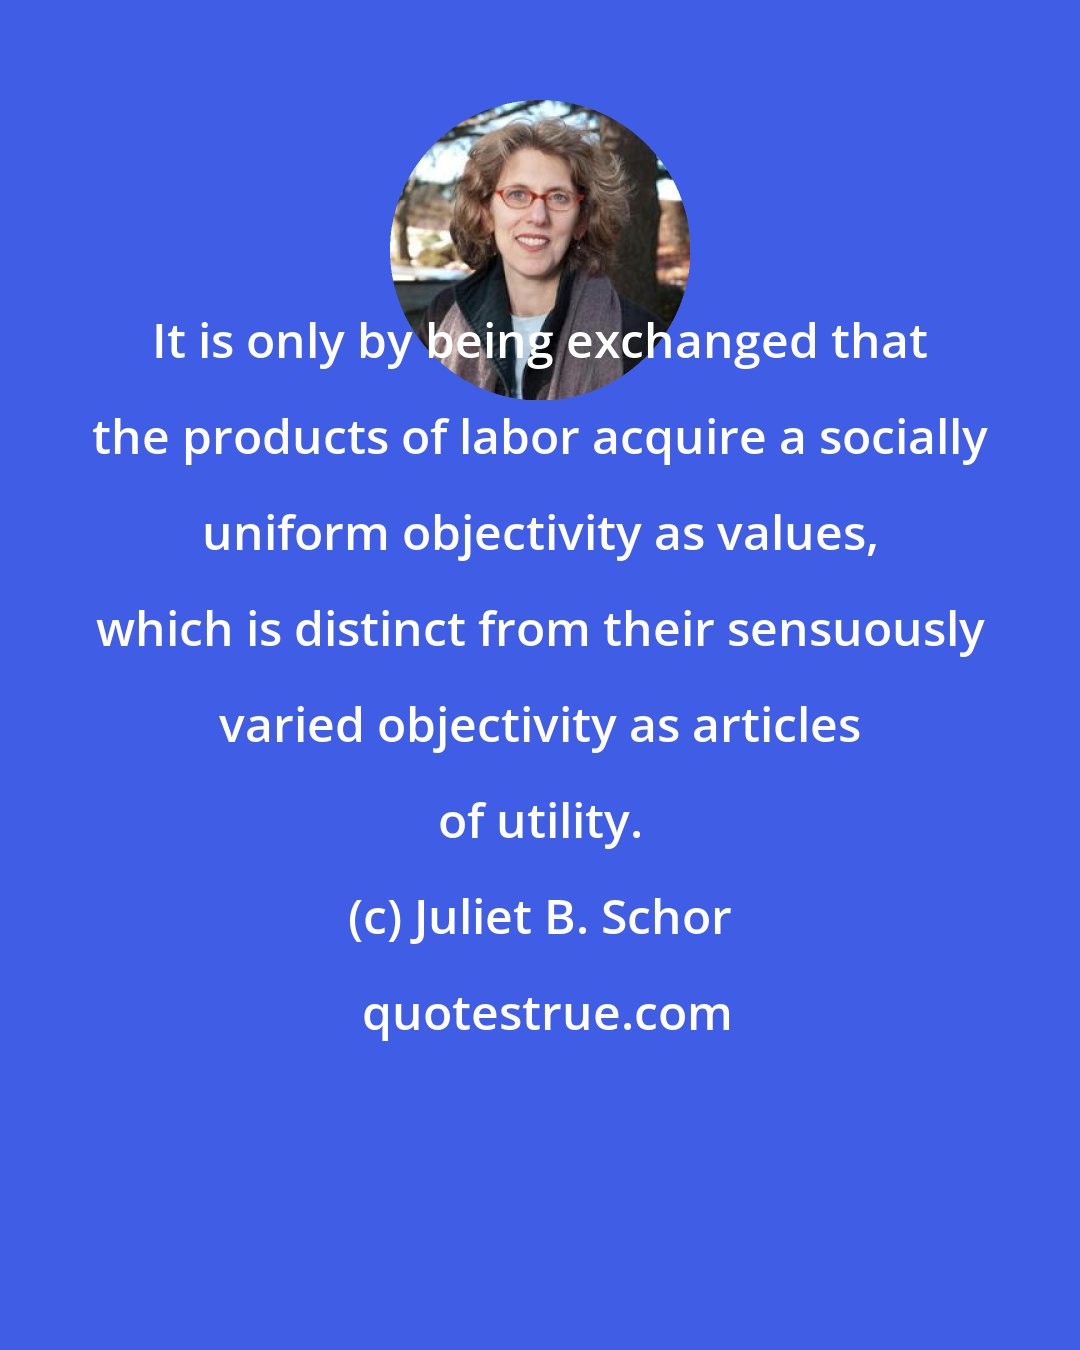 Juliet B. Schor: It is only by being exchanged that the products of labor acquire a socially uniform objectivity as values, which is distinct from their sensuously varied objectivity as articles of utility.